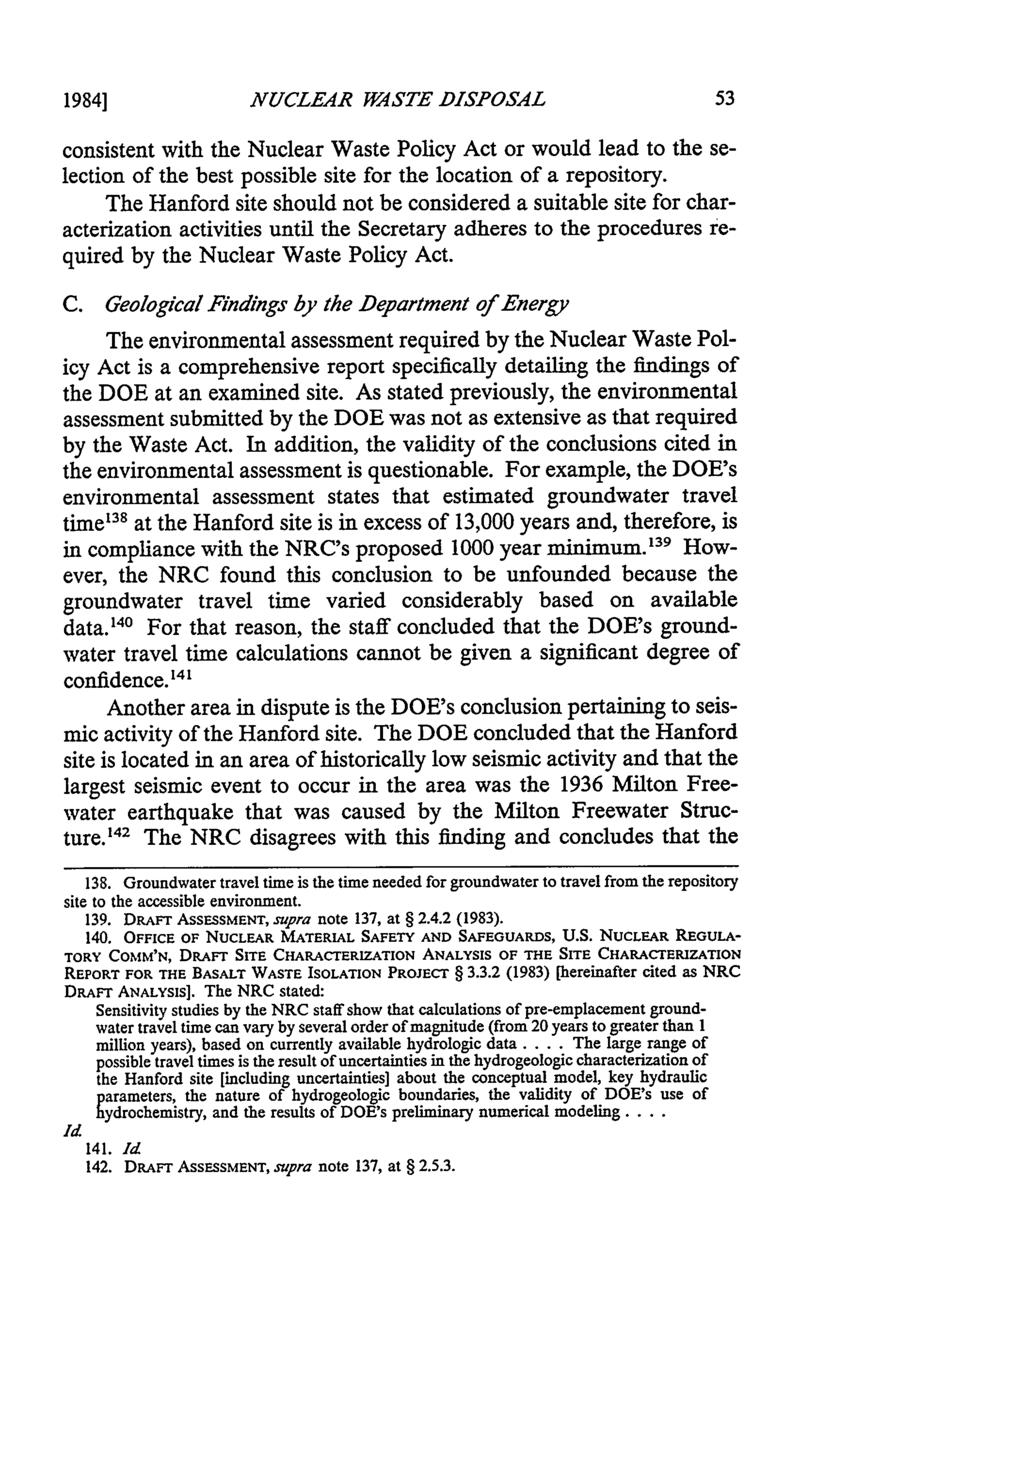 Klausner: State Participation in the Disposal of High-Level Nuclear Waste 1984] NUCLEAR WASTE DISPOSAL consistent with the Nuclear Waste Policy Act or would lead to the selection of the best possible